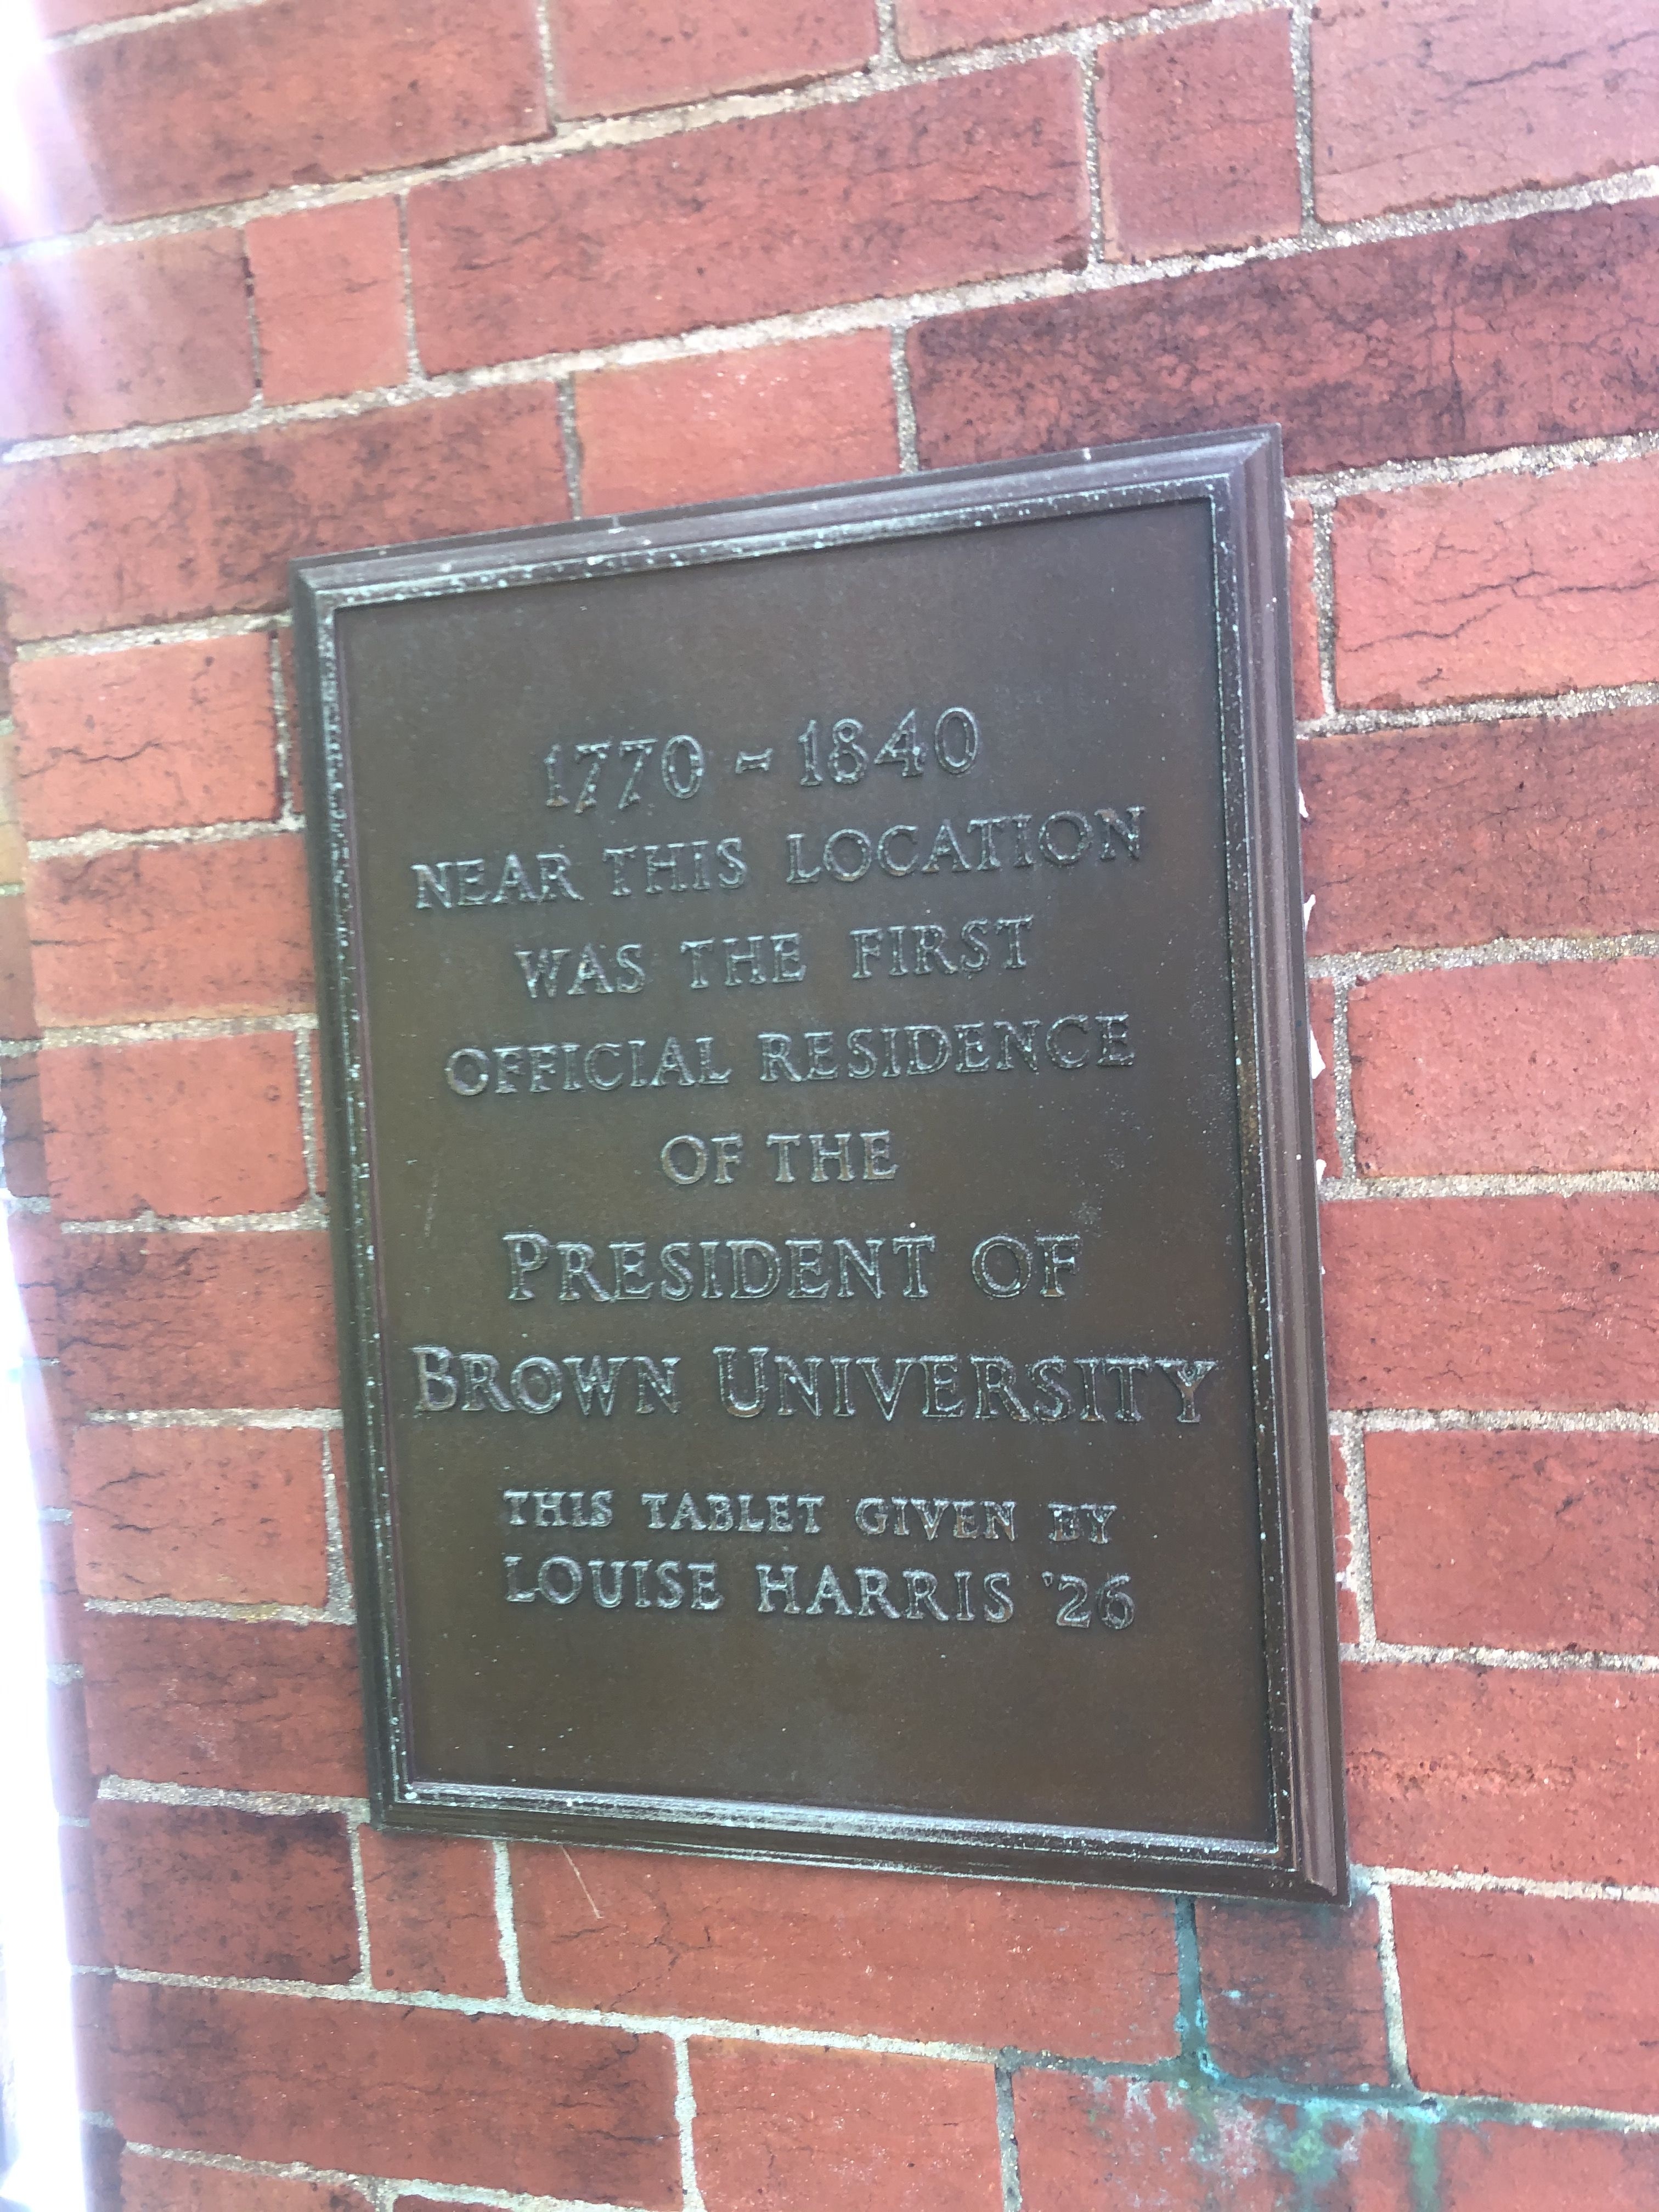 The First Official Residence of the President of Brown University Marker